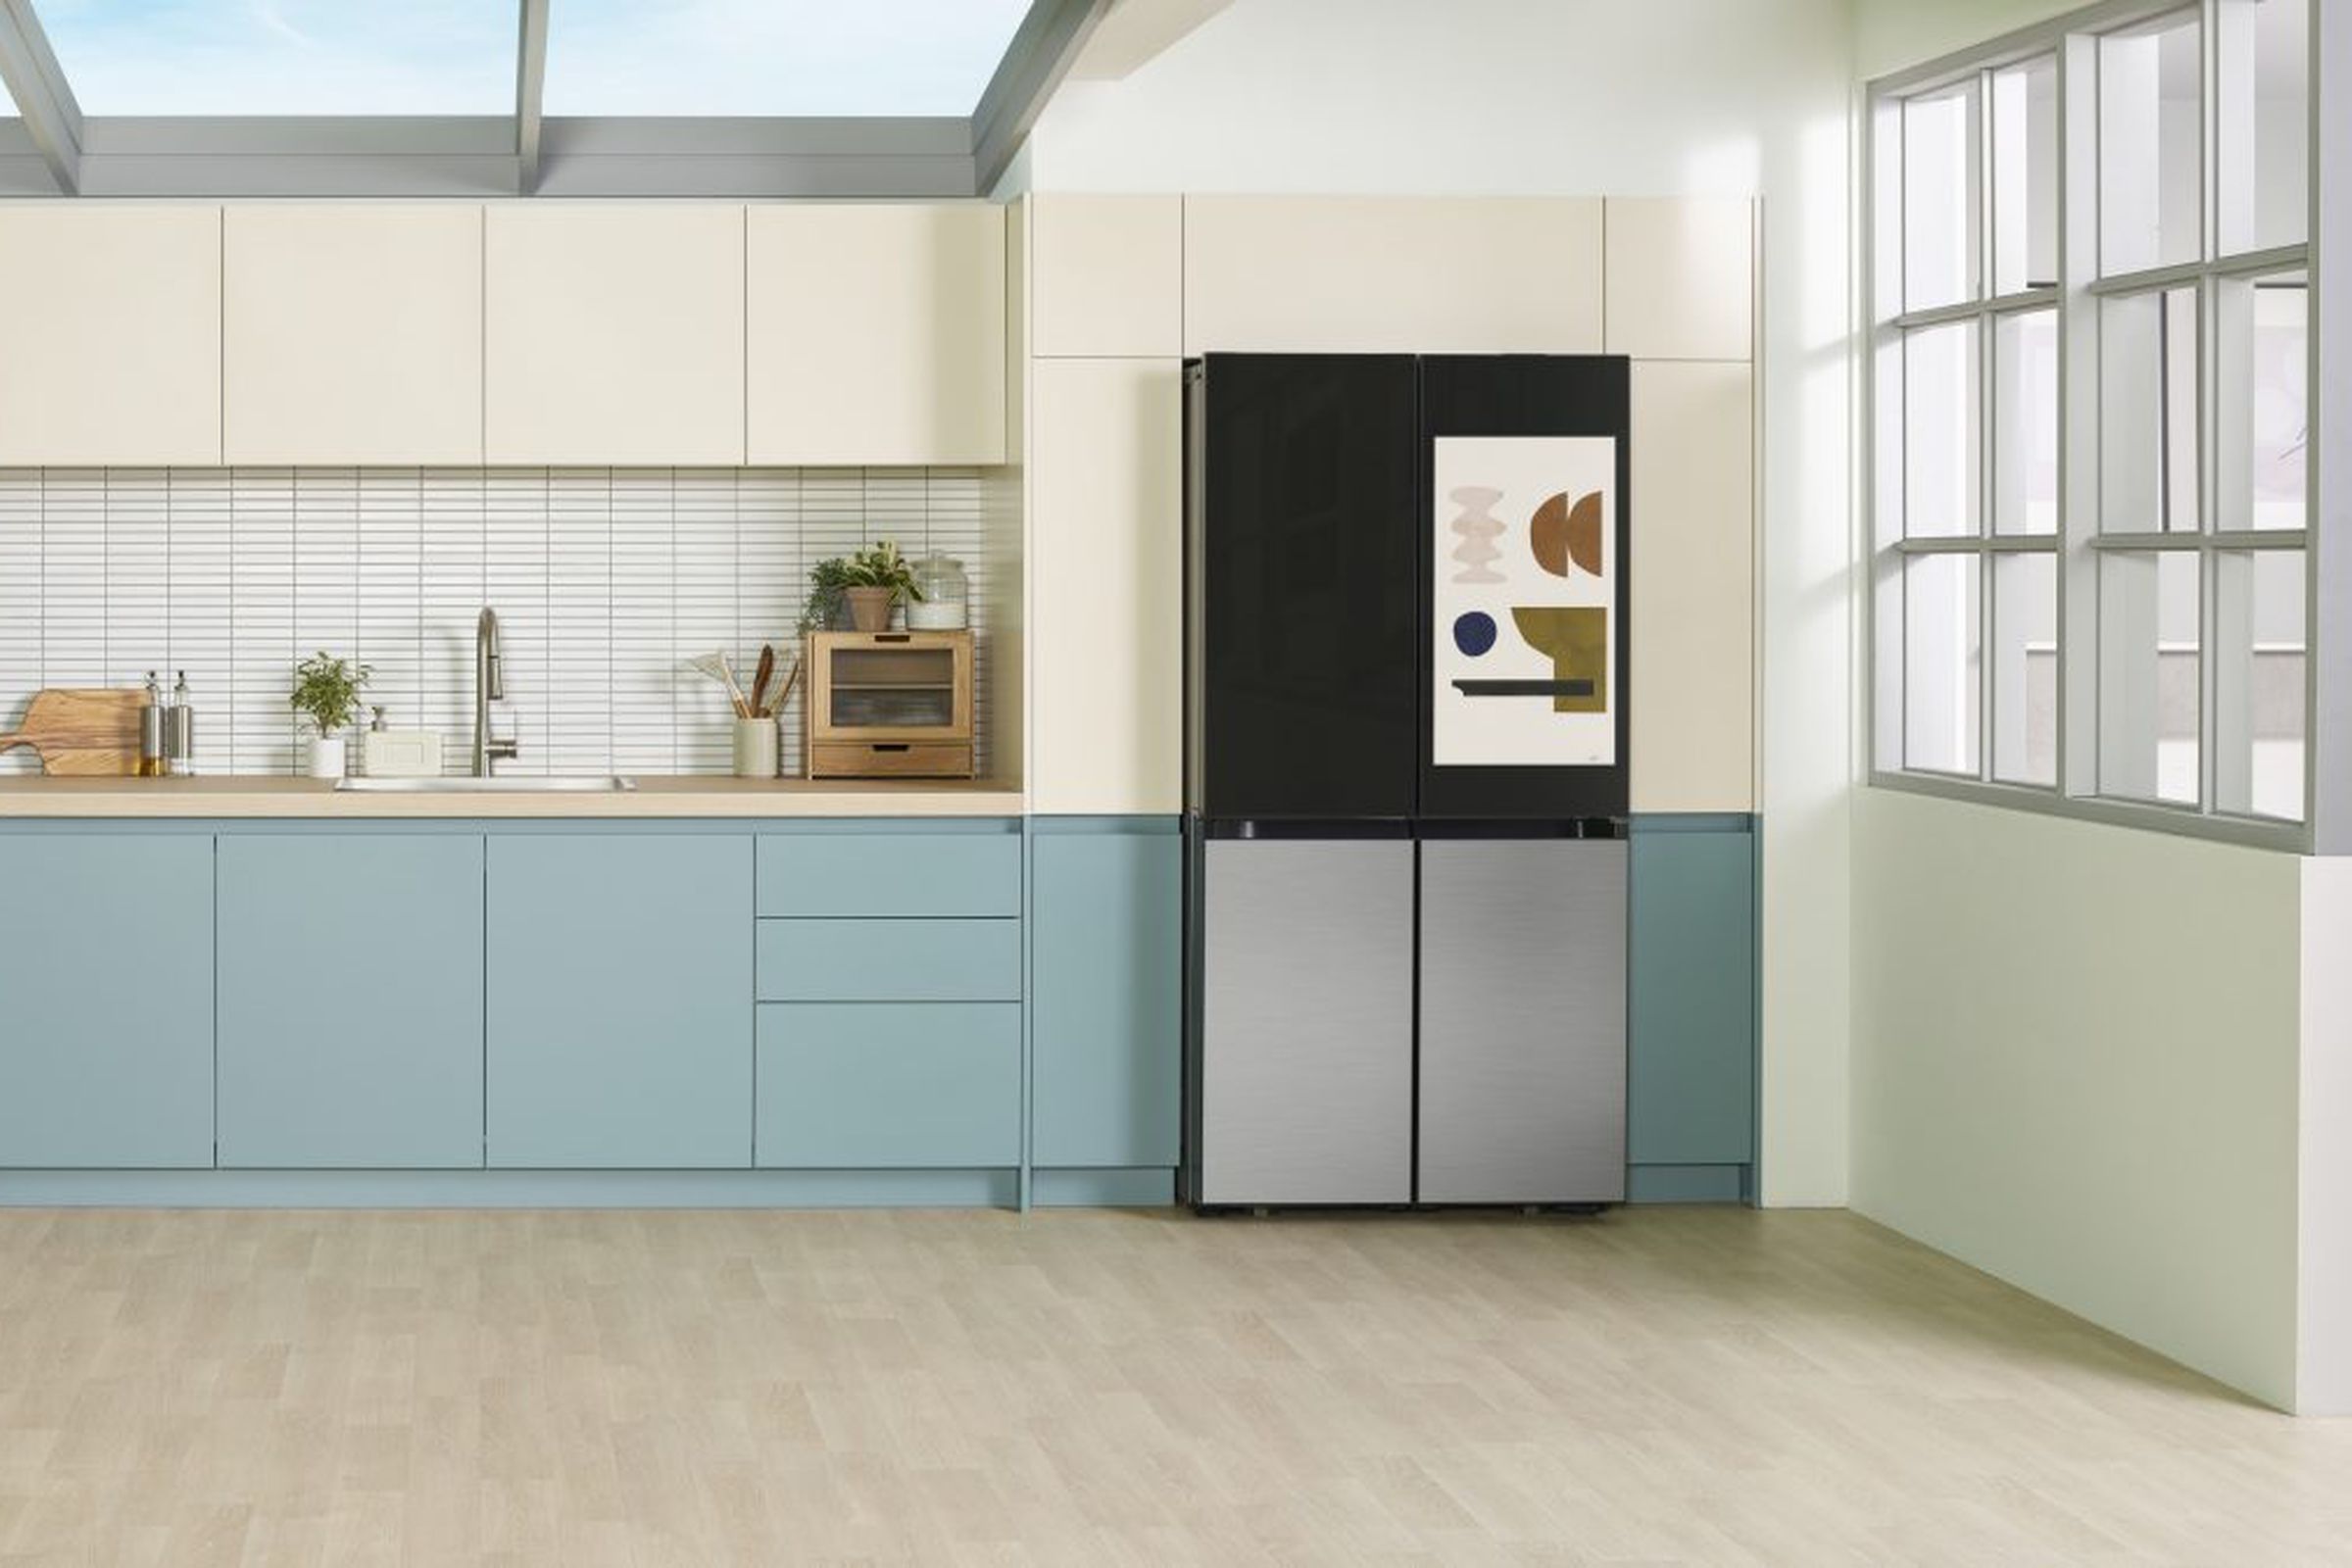 A lifestyle image of the Samsung Bespoke Refrigerator Family Hub, featuring the smart fridge in a clean, modern kitchen.